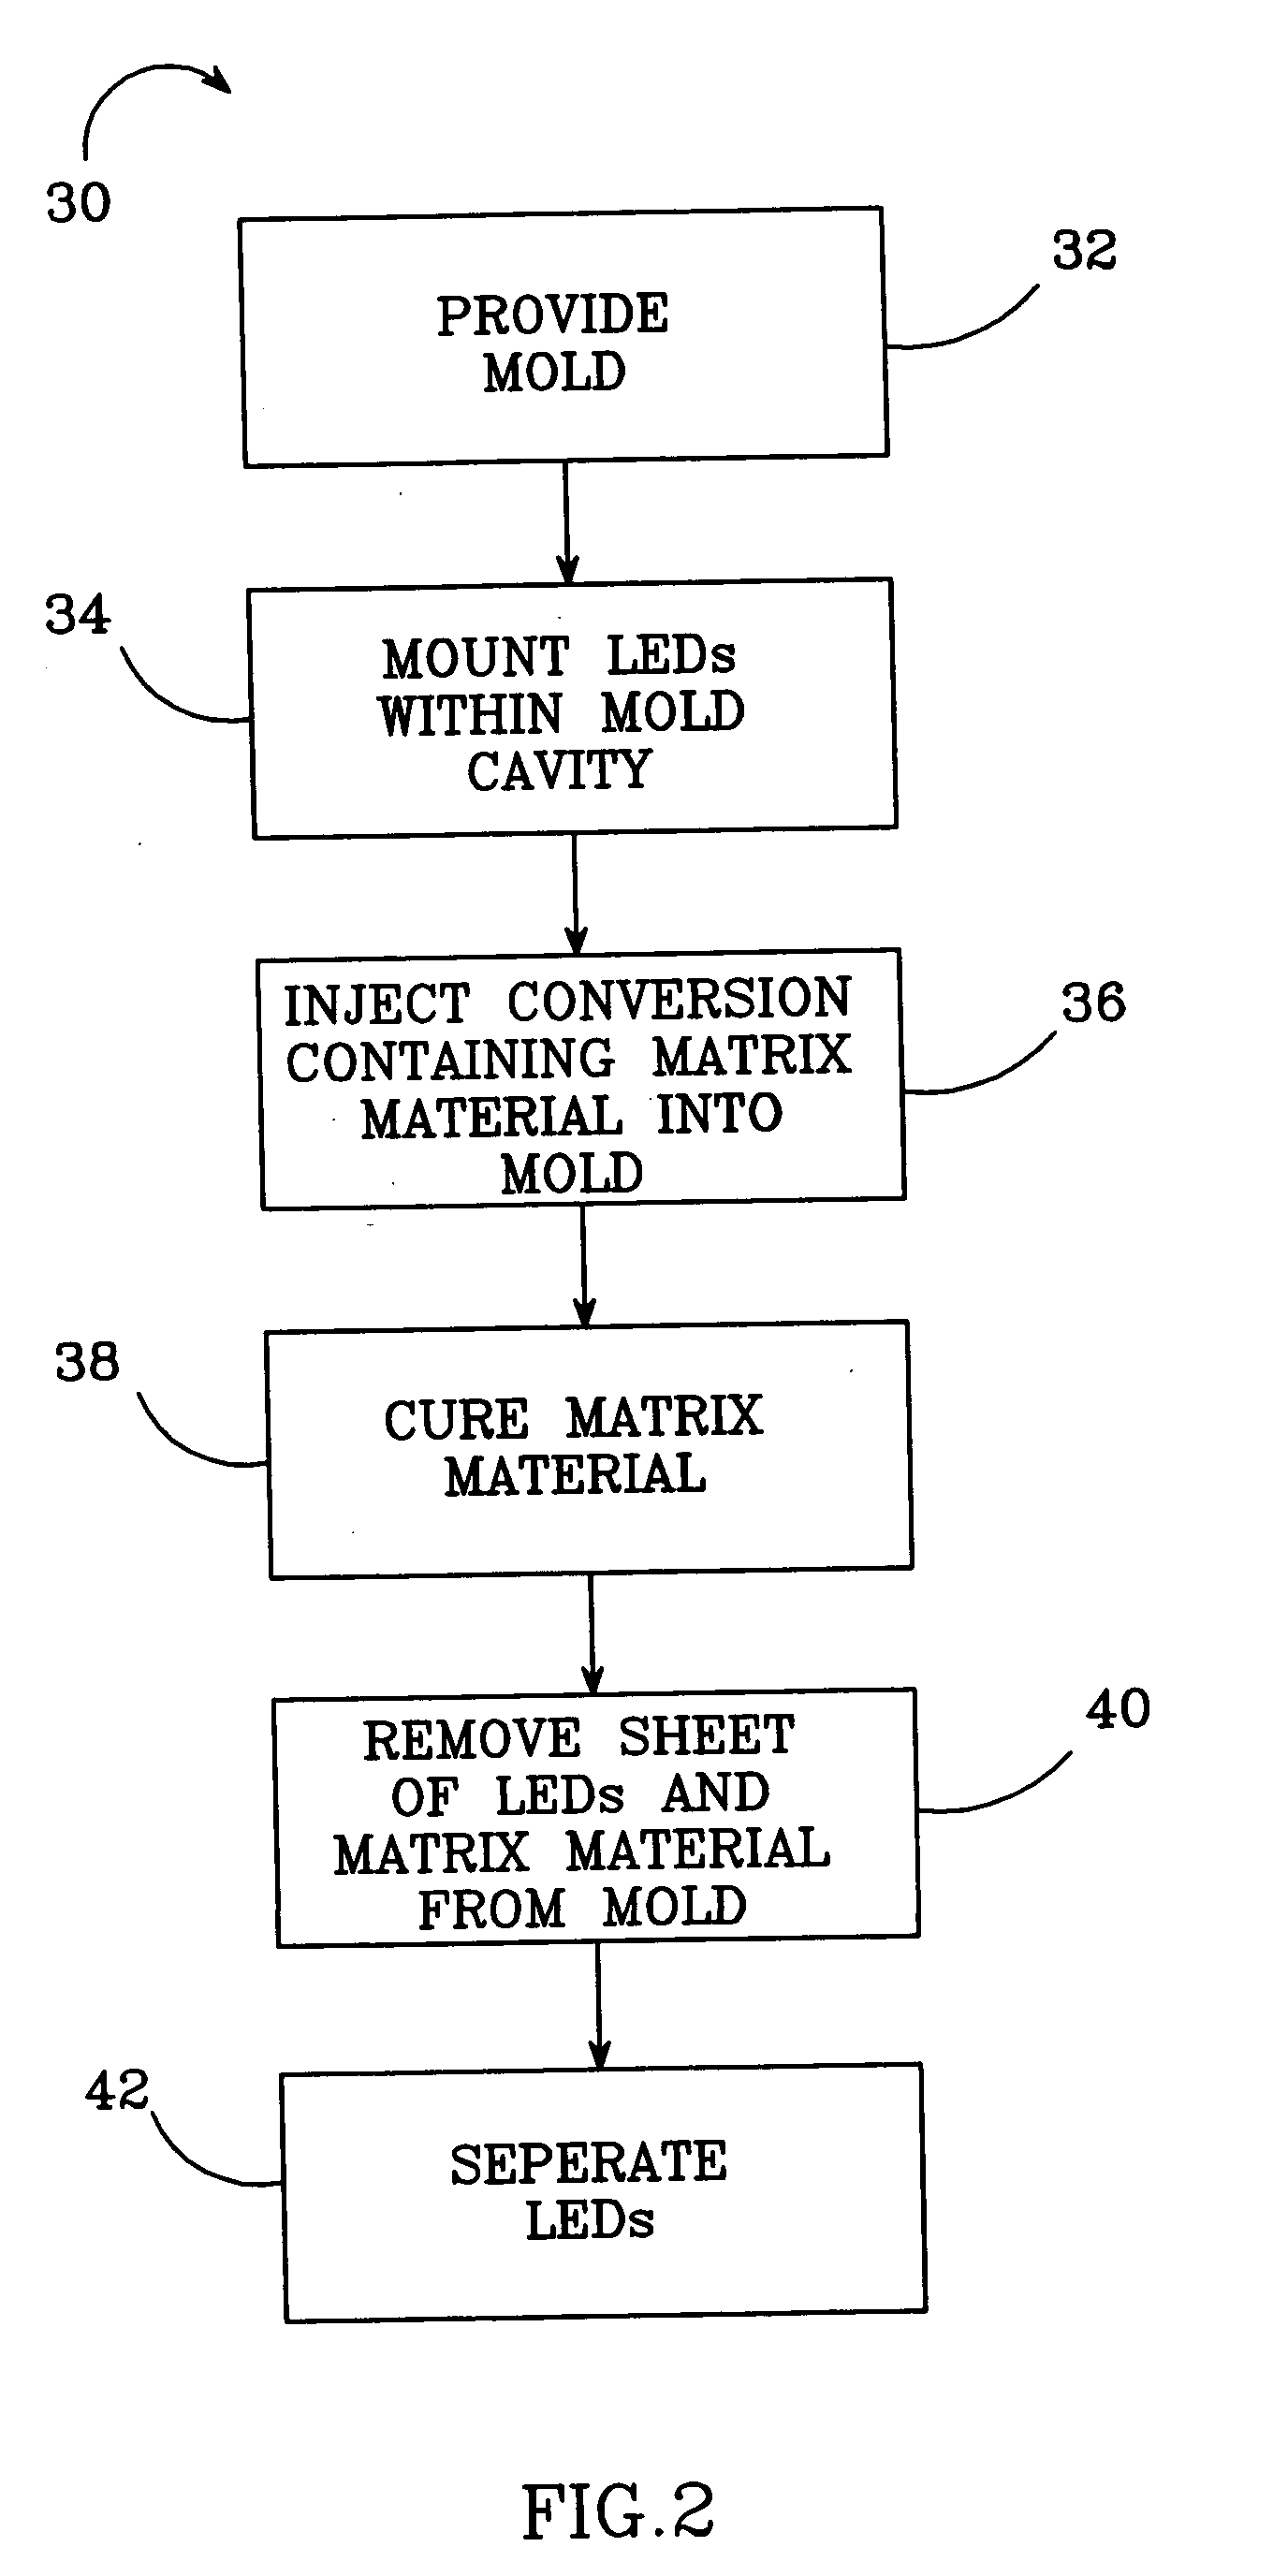 Molded chip fabrication method and apparatus